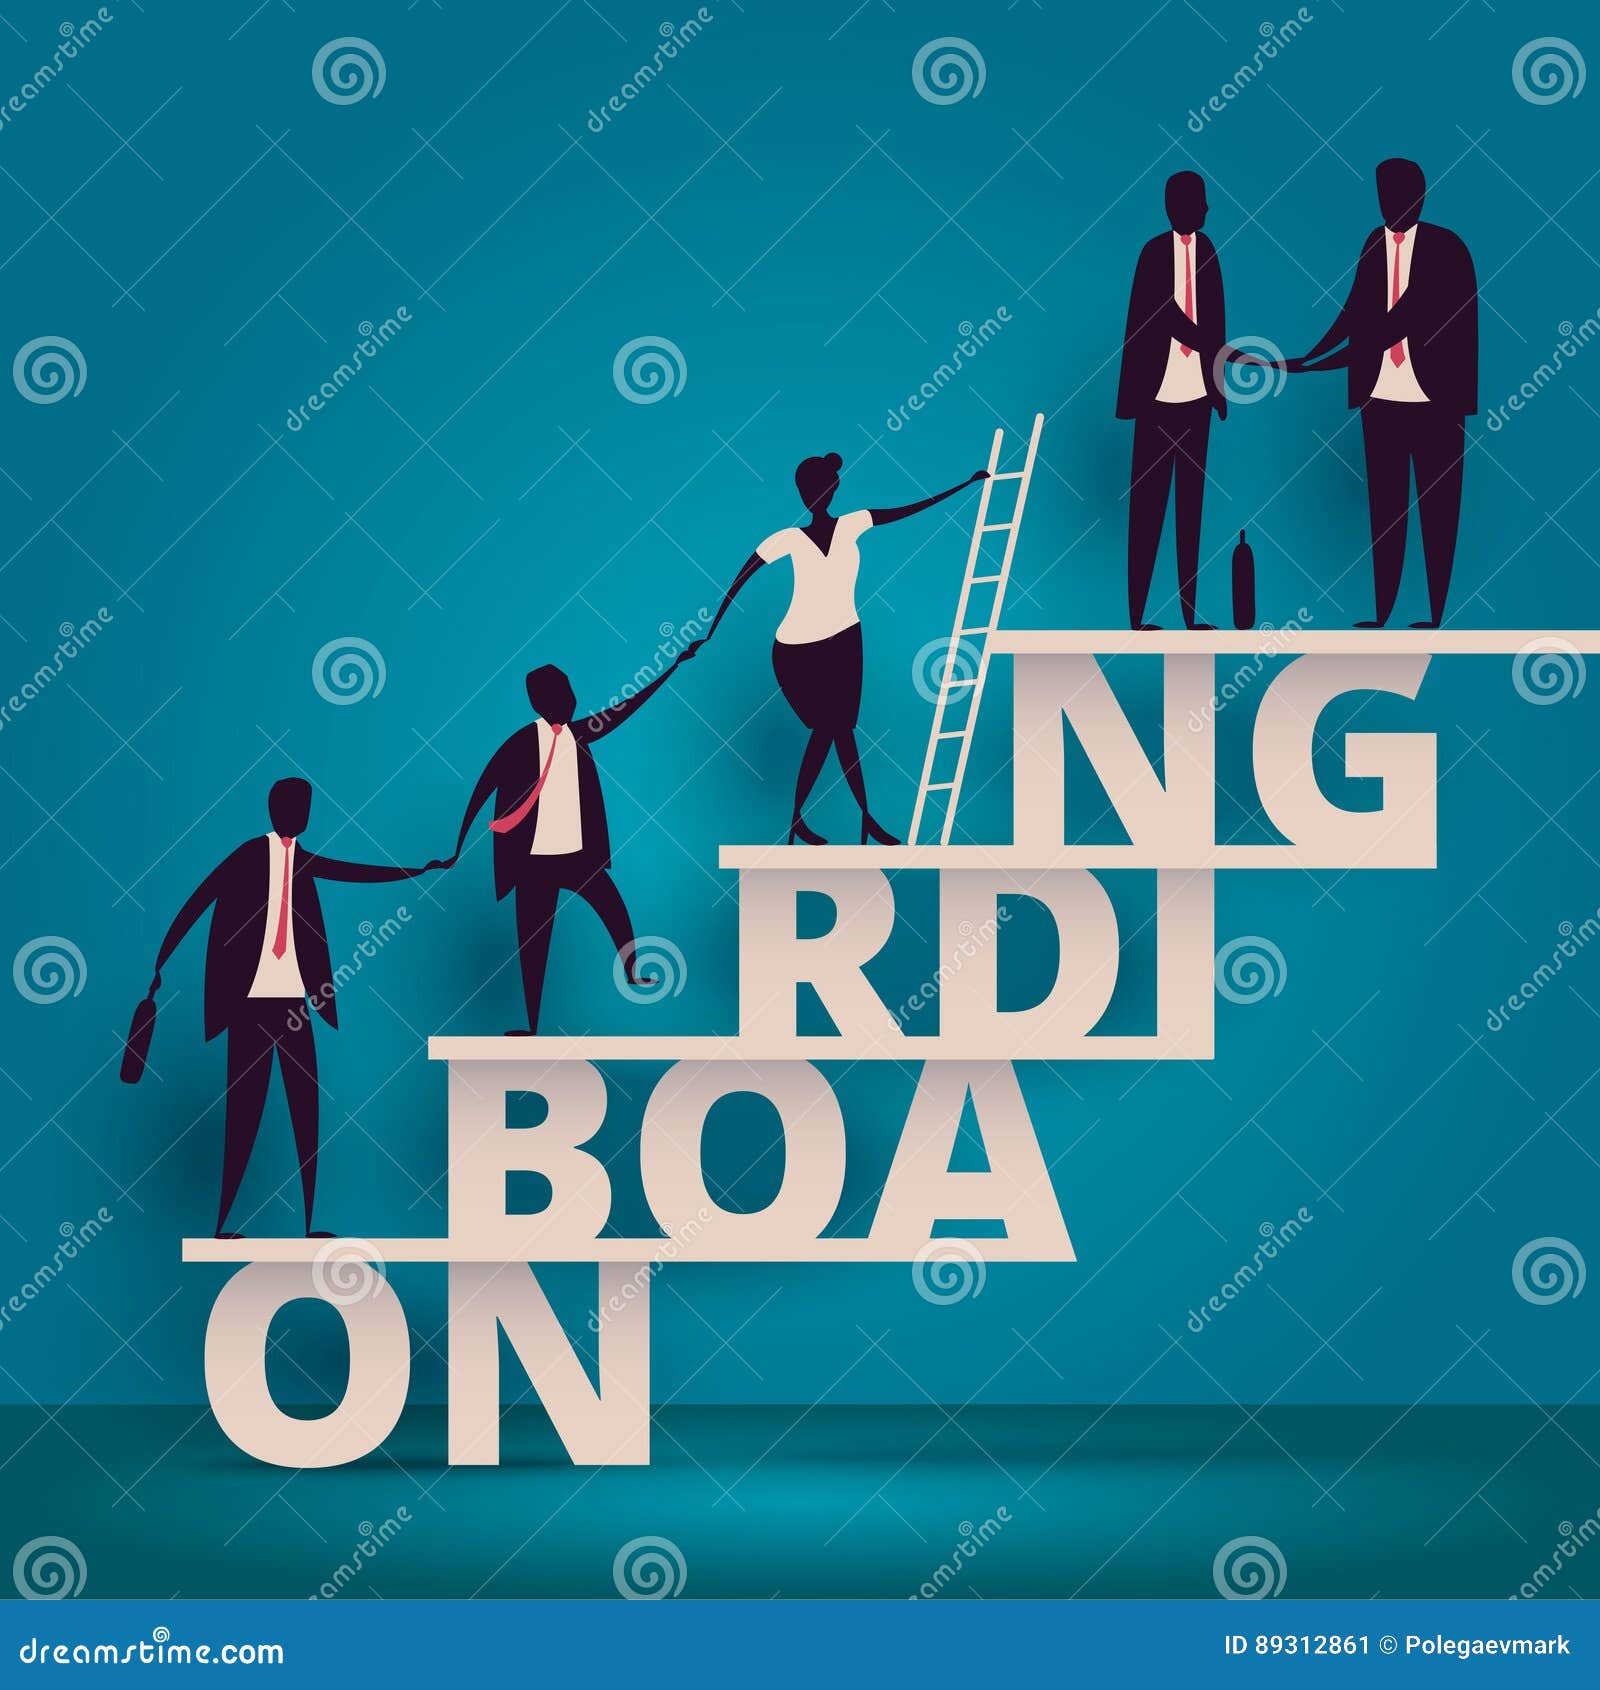 Onboarding Cartoons Illustrations And Vector Stock Images 92 Pictures To Download From